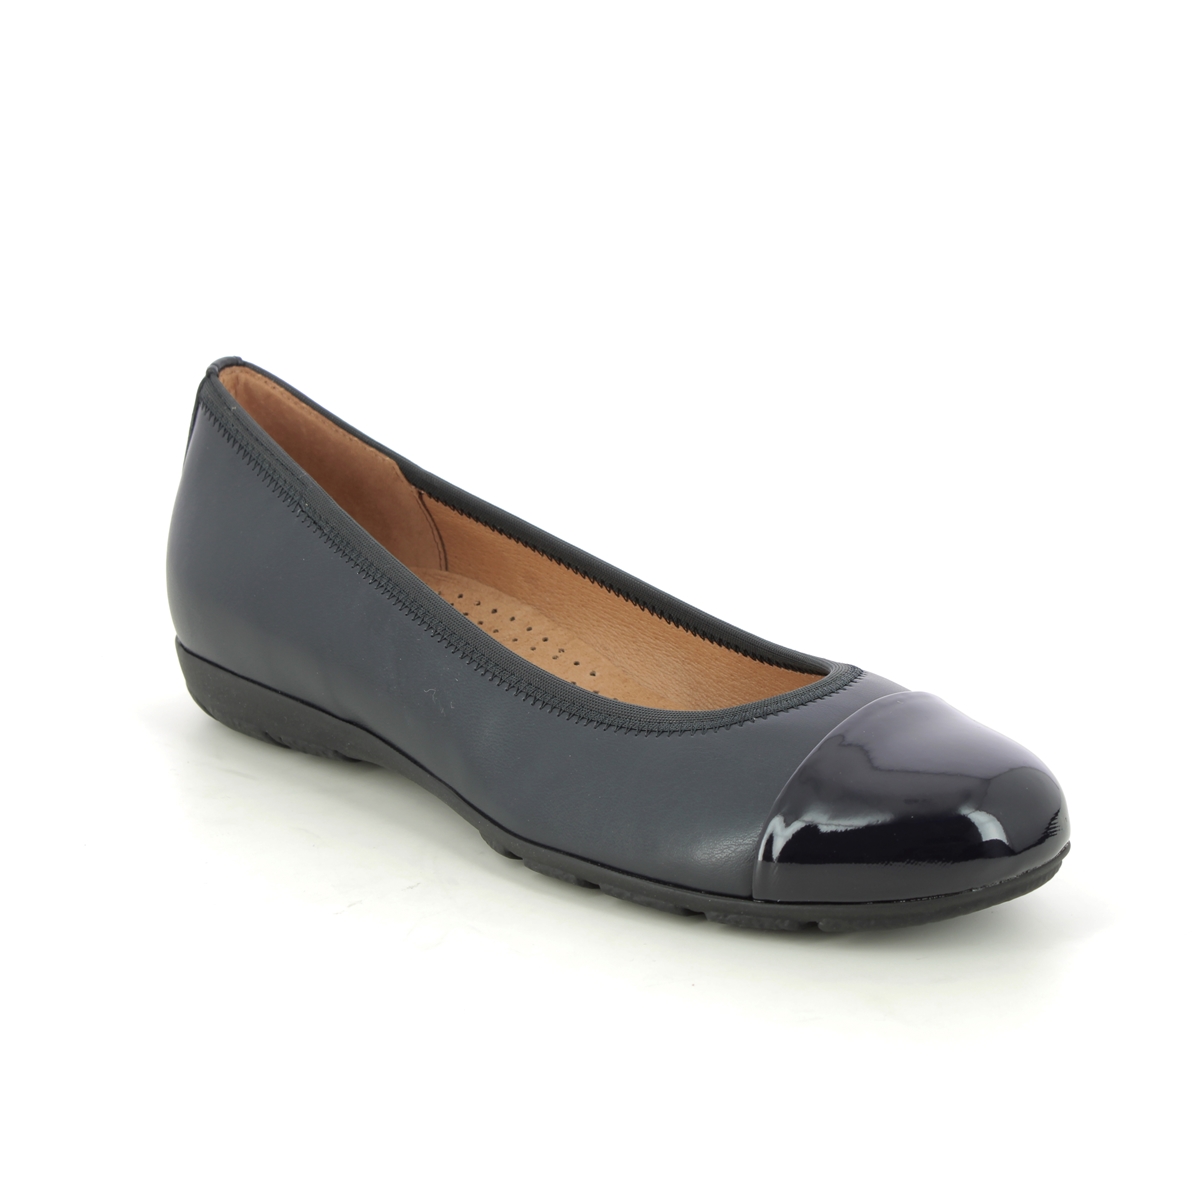 Gabor Raspa Navy Womens pumps 24.161.56 in a Plain Leather in Size 6.5